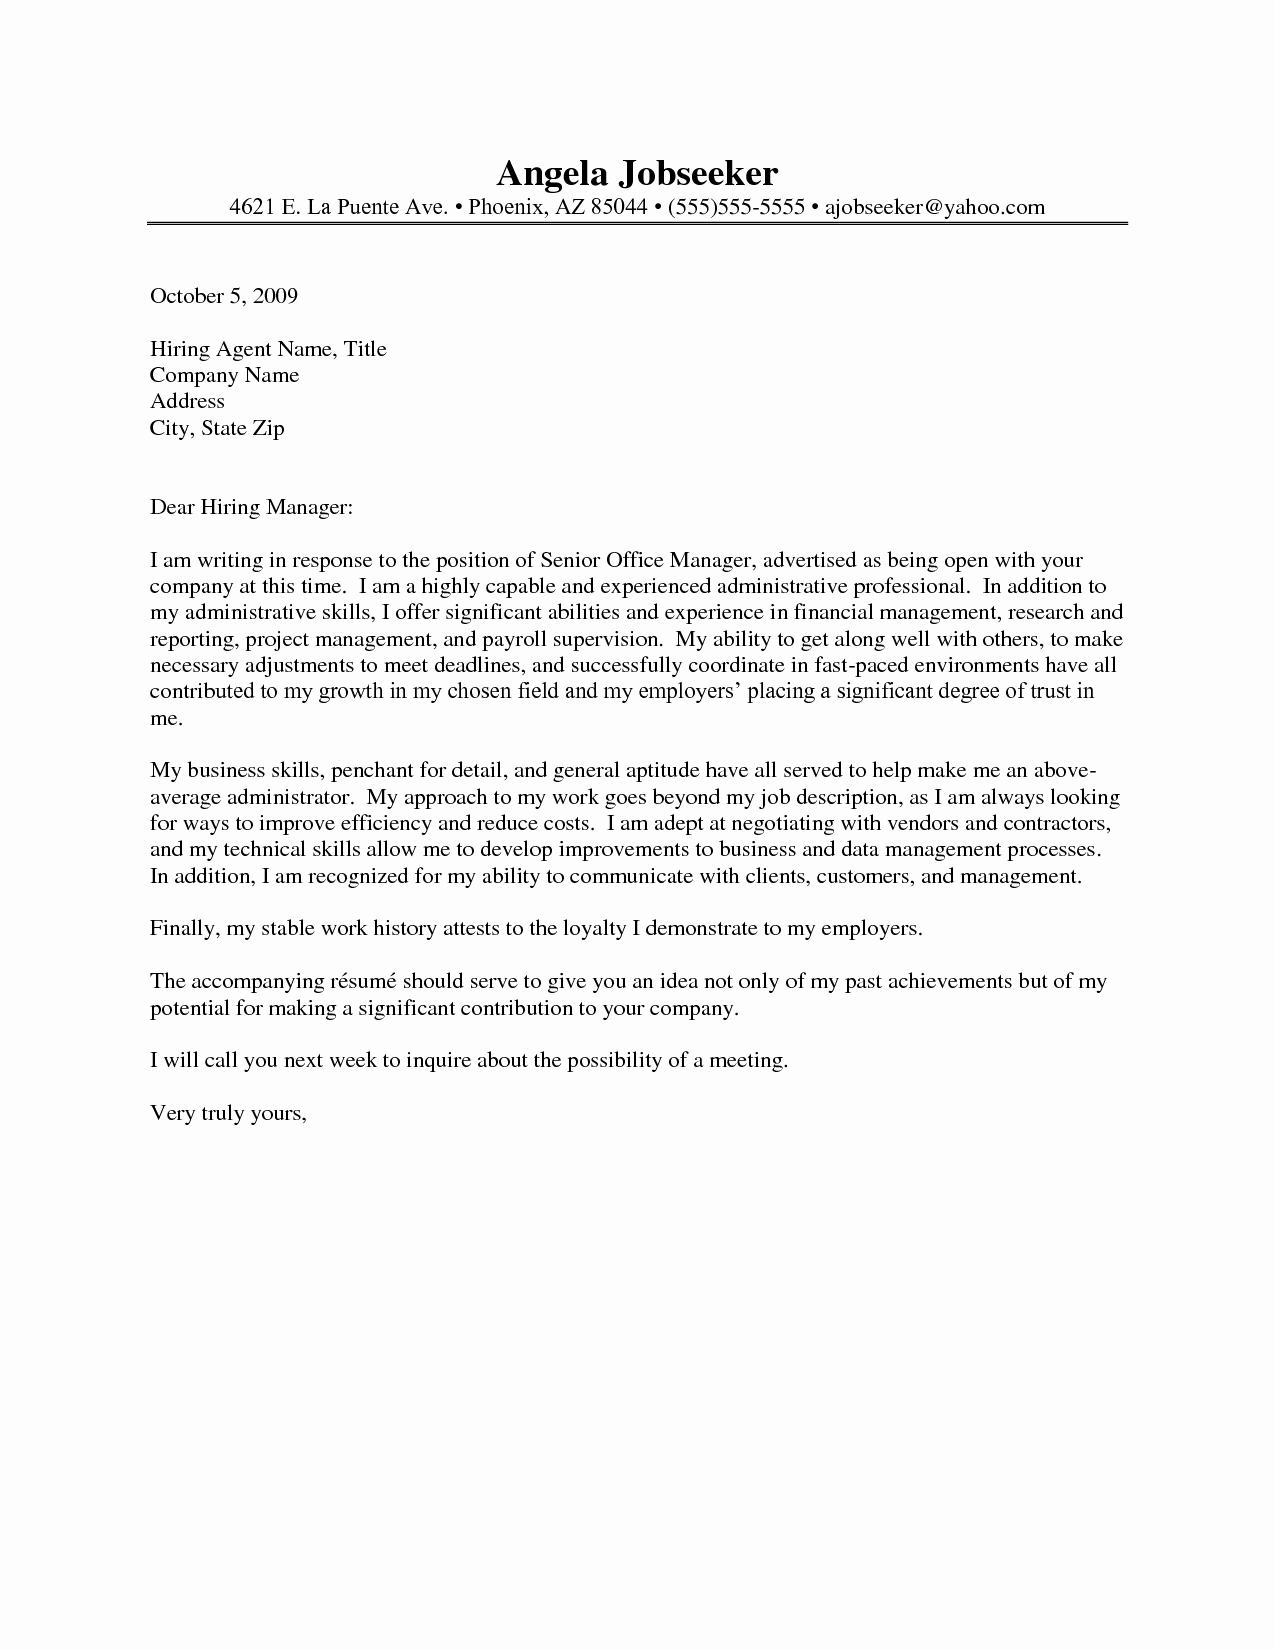 Administrative assistant Cover Letter Template Awesome Administrative assistant Cover Letters 2016